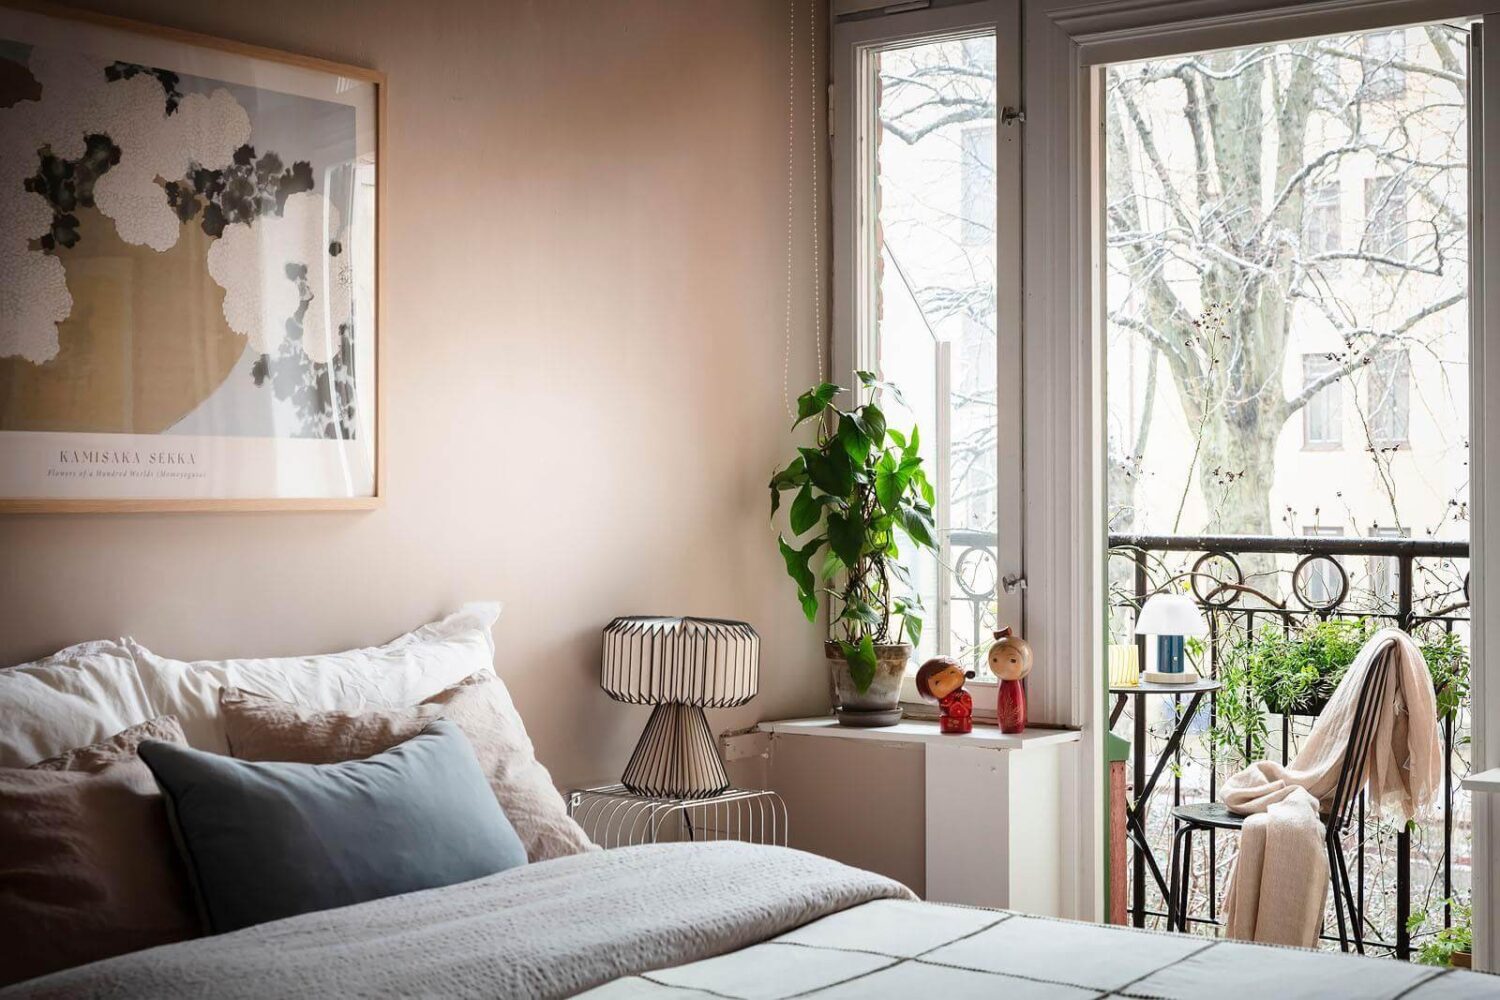 soft-pink-walls-bedroom-with-balcony-nordroom